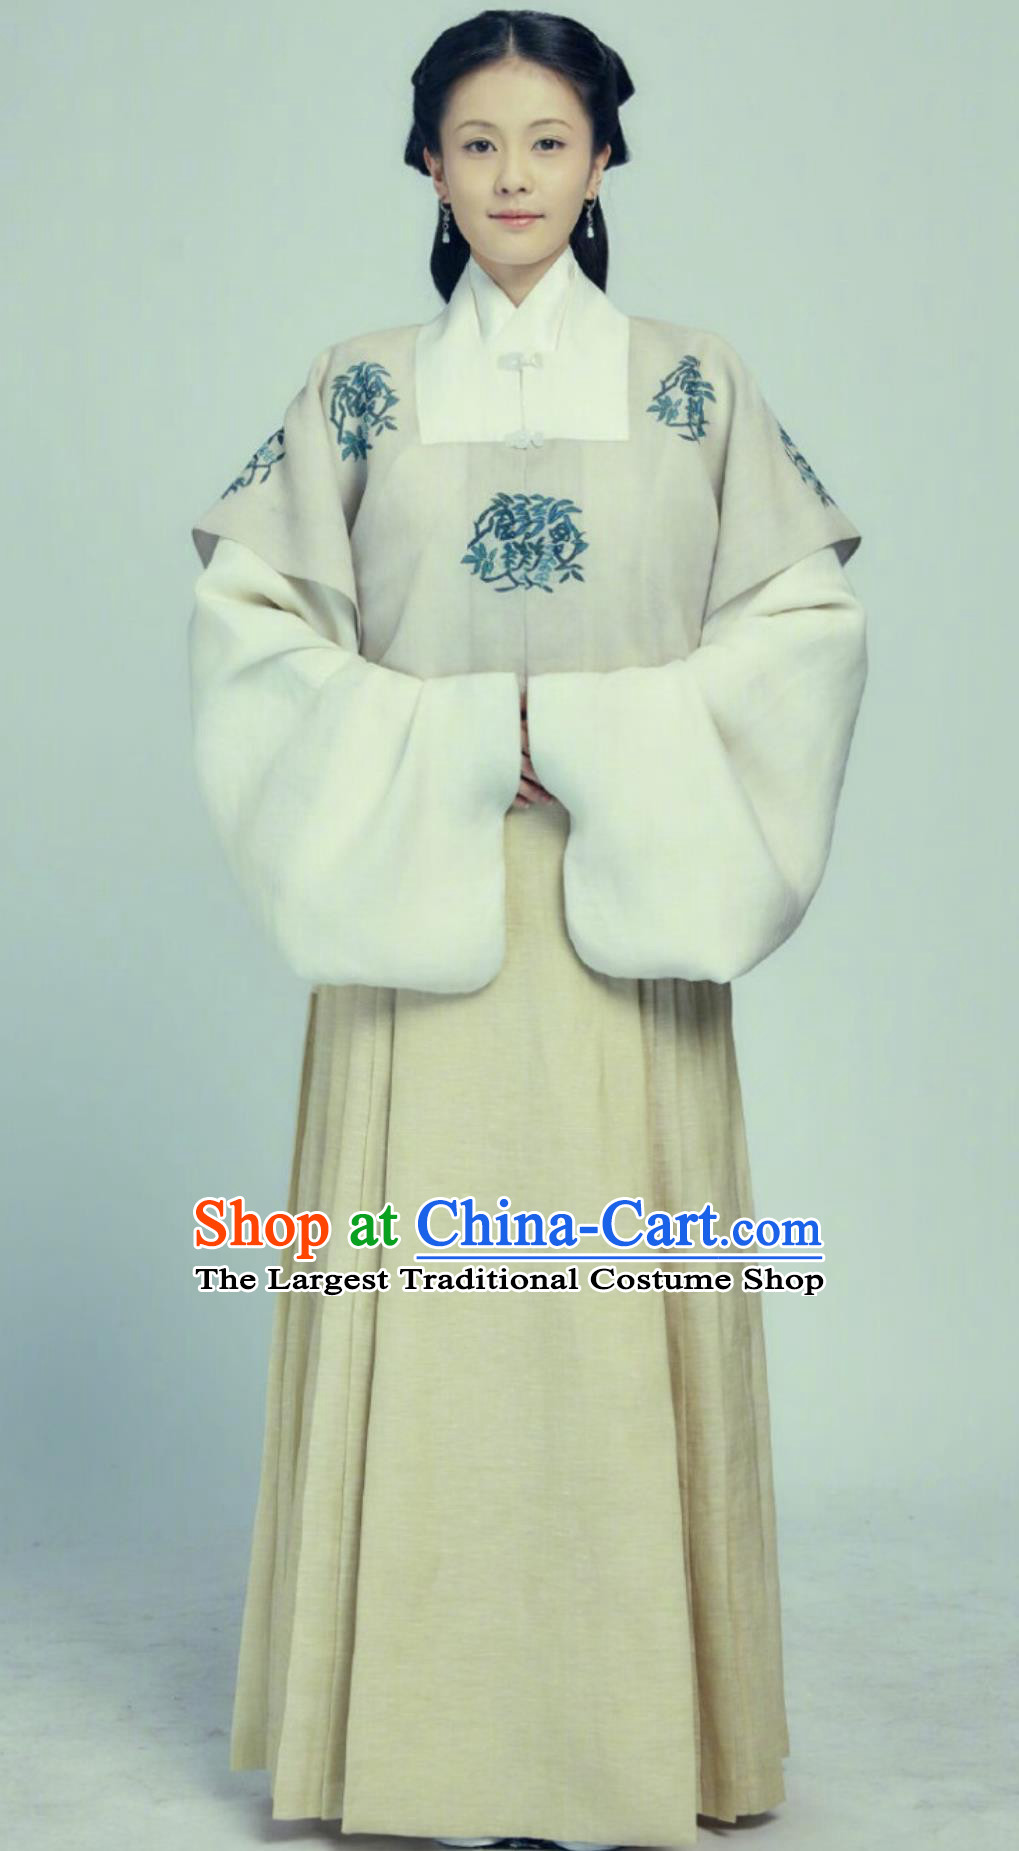 Drama Song of Youth Young Mistress Lin Shao Chun Hanfu Clothing Ancient Chinese Ming Dynasty Rich Lady Costumes